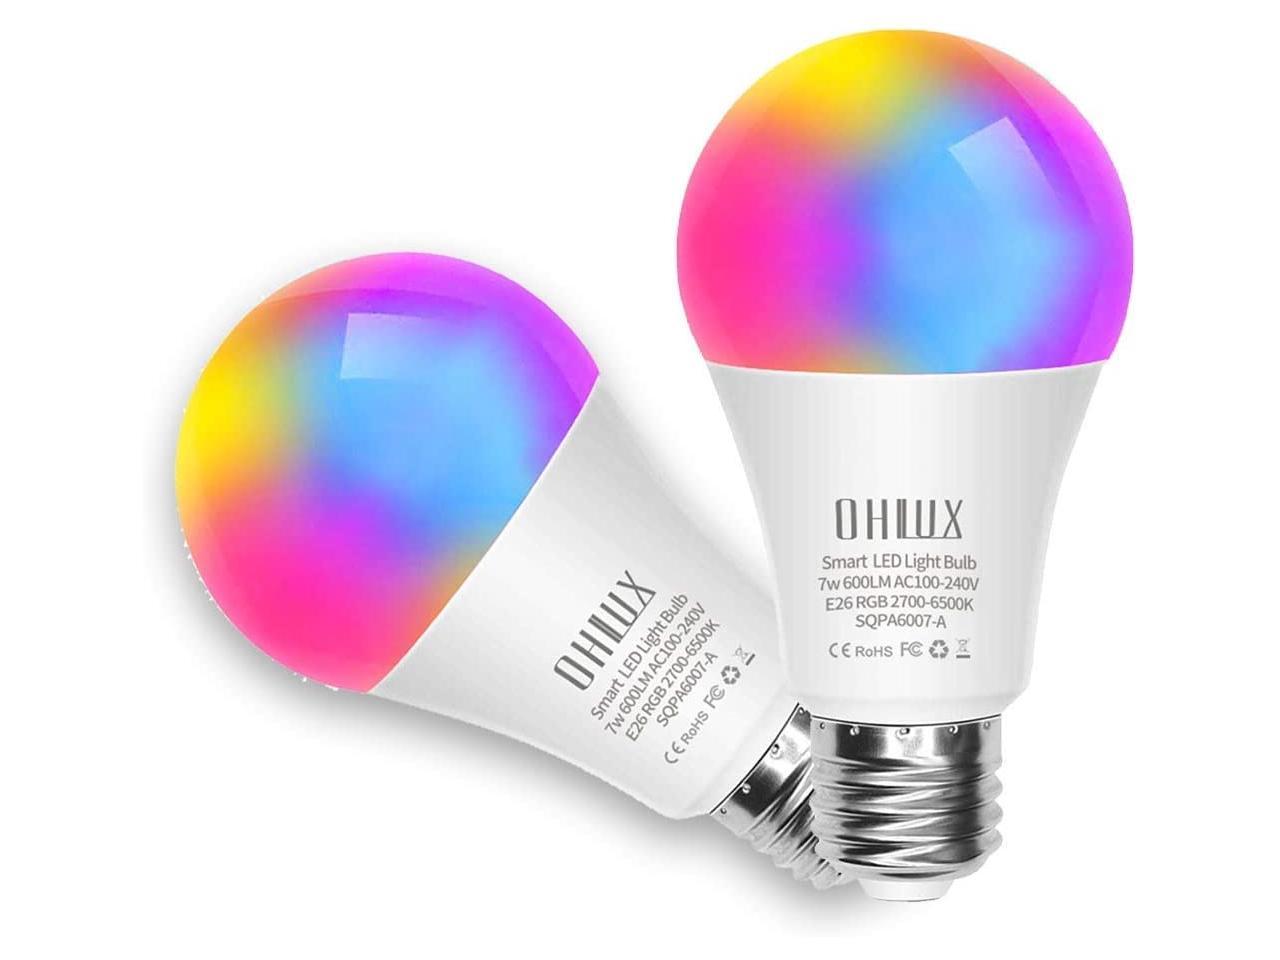 Compatible with Alexa and Google Home RGBCW Wi-Fi LED Bulb A19 60W Equivalent 2 Pack 7W 600LM Dimmable Multicolored Lights No Hub Required WIXANN Smart WiFi Bulb 